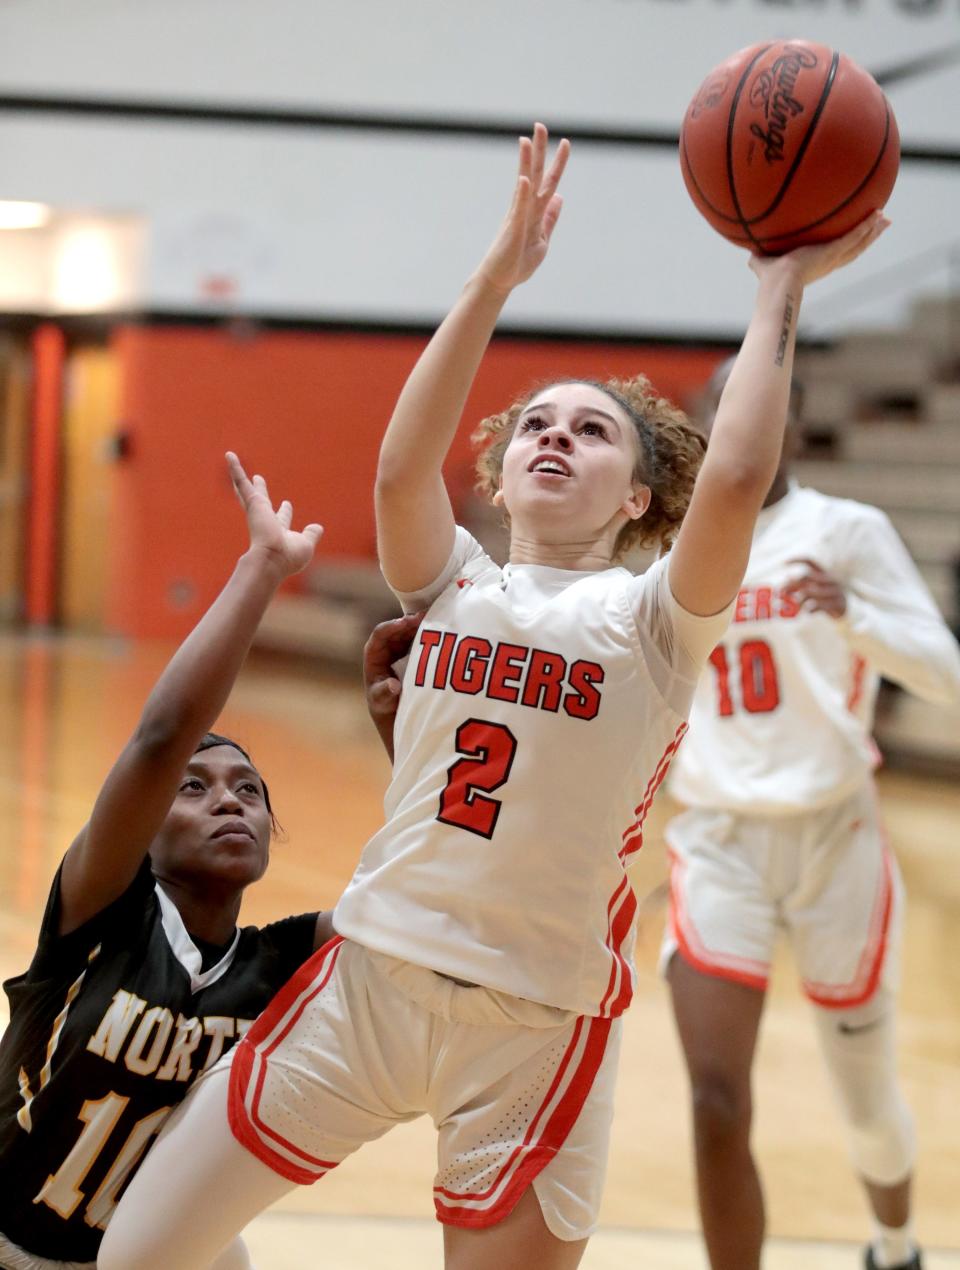 Massillon's Alana Settles goes to the hoop with pressure from Akron North's Shukuru Kalenga during Monday's game.